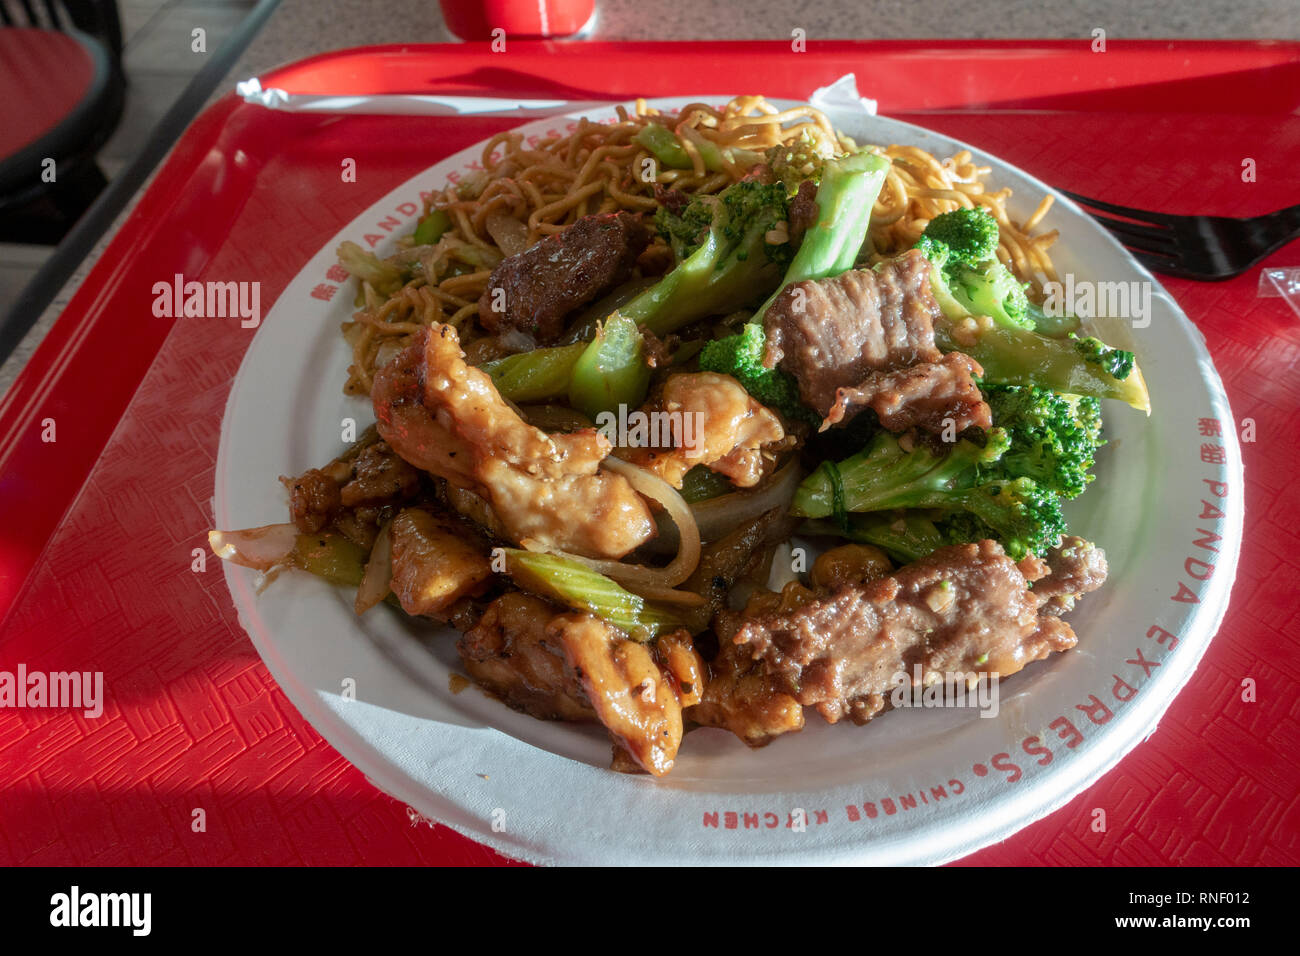 Chinese meal from a fast food outlet in Las Vegas, Nevada, United States. Stock Photo